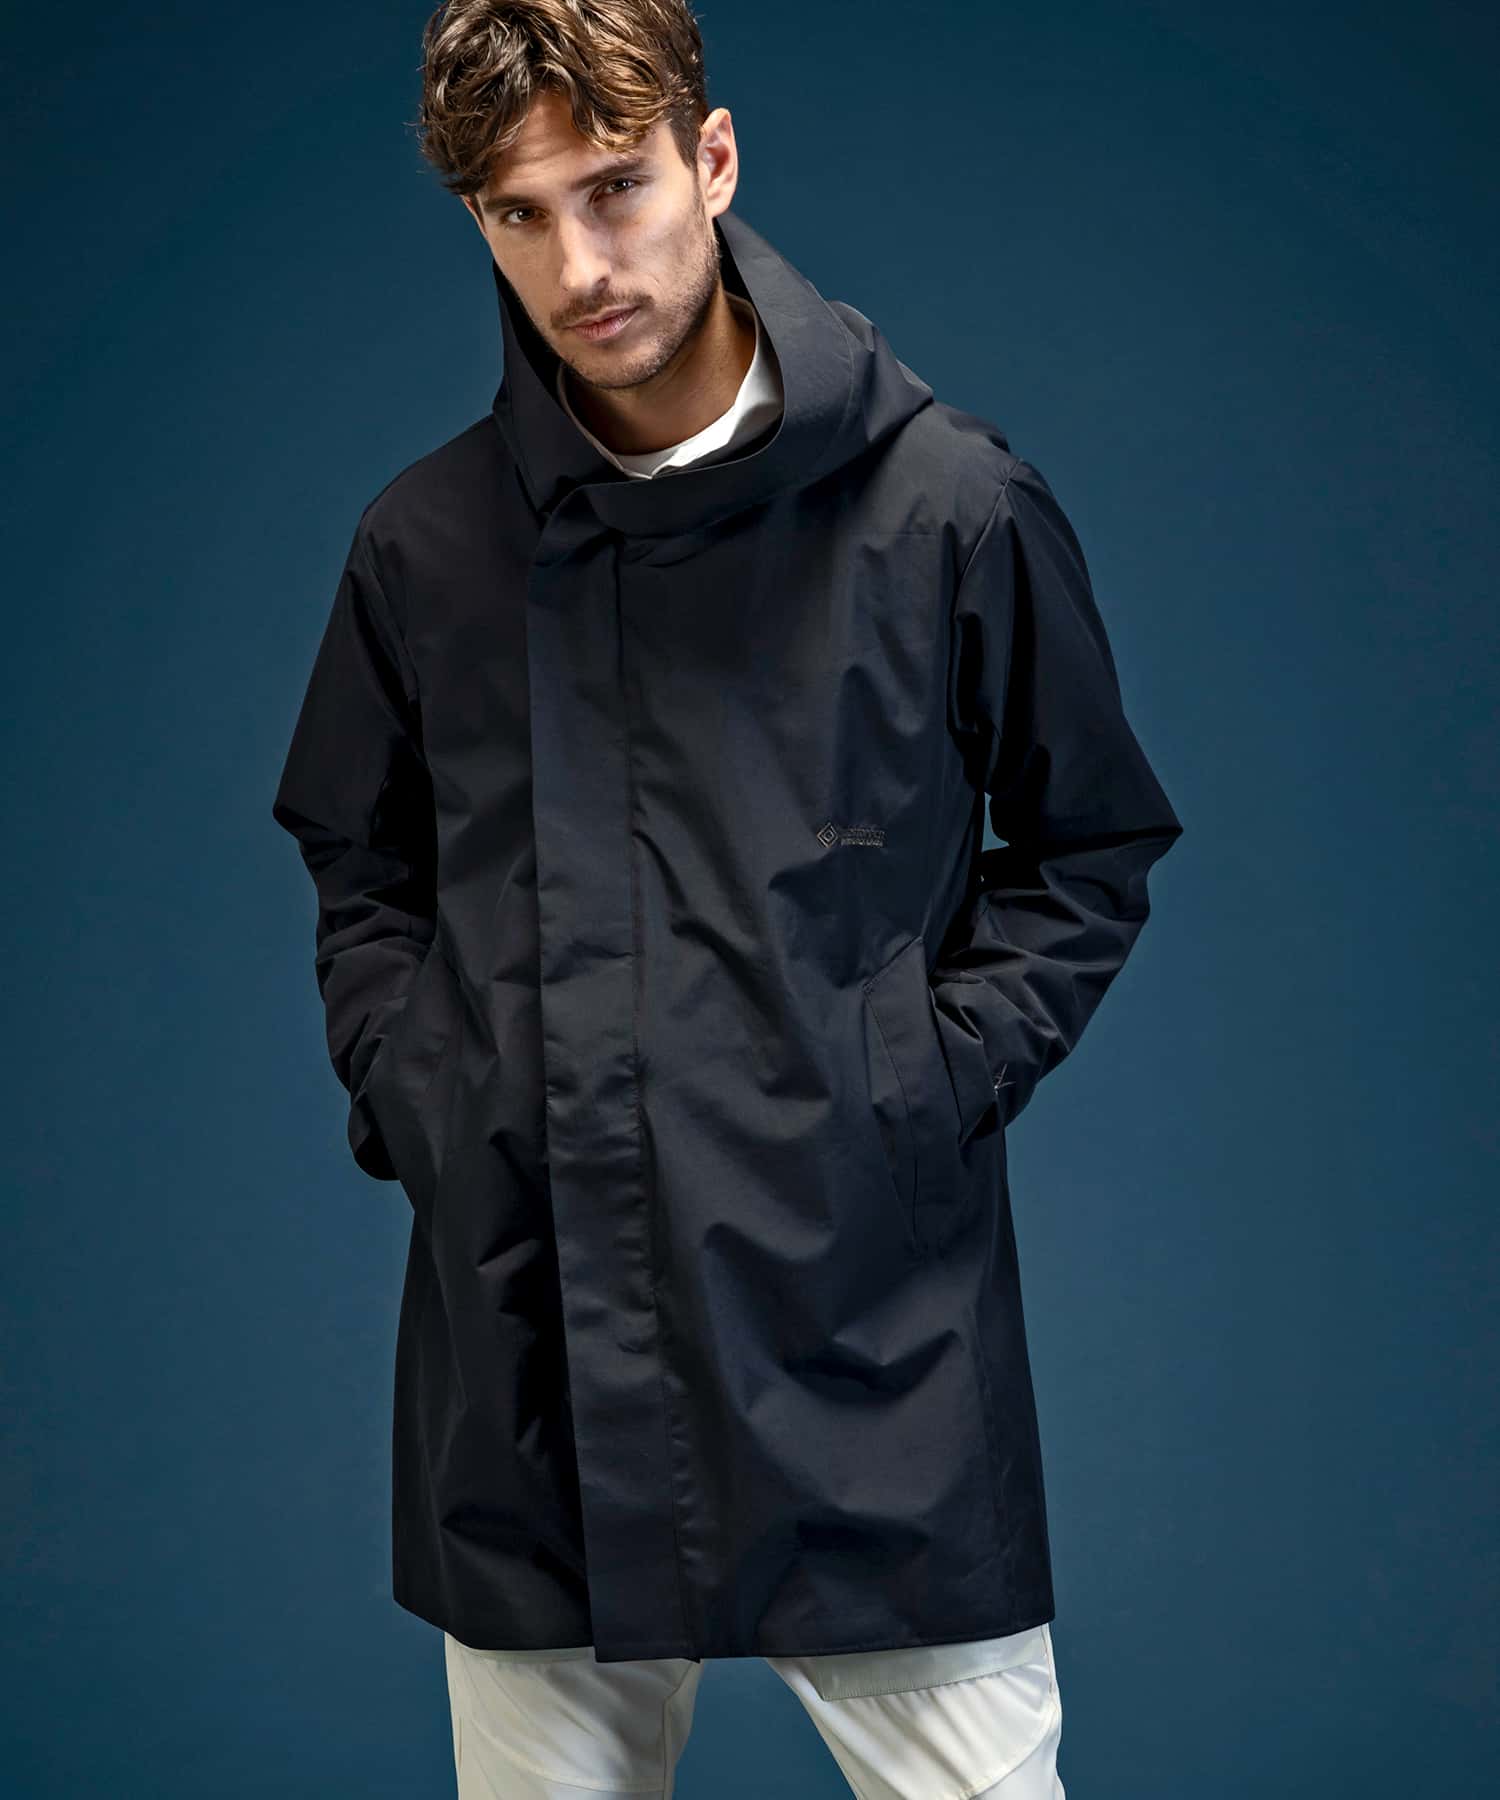 MENS】ラップコート WINDSTOPPER プロダクト by GORE-TEX LABS 